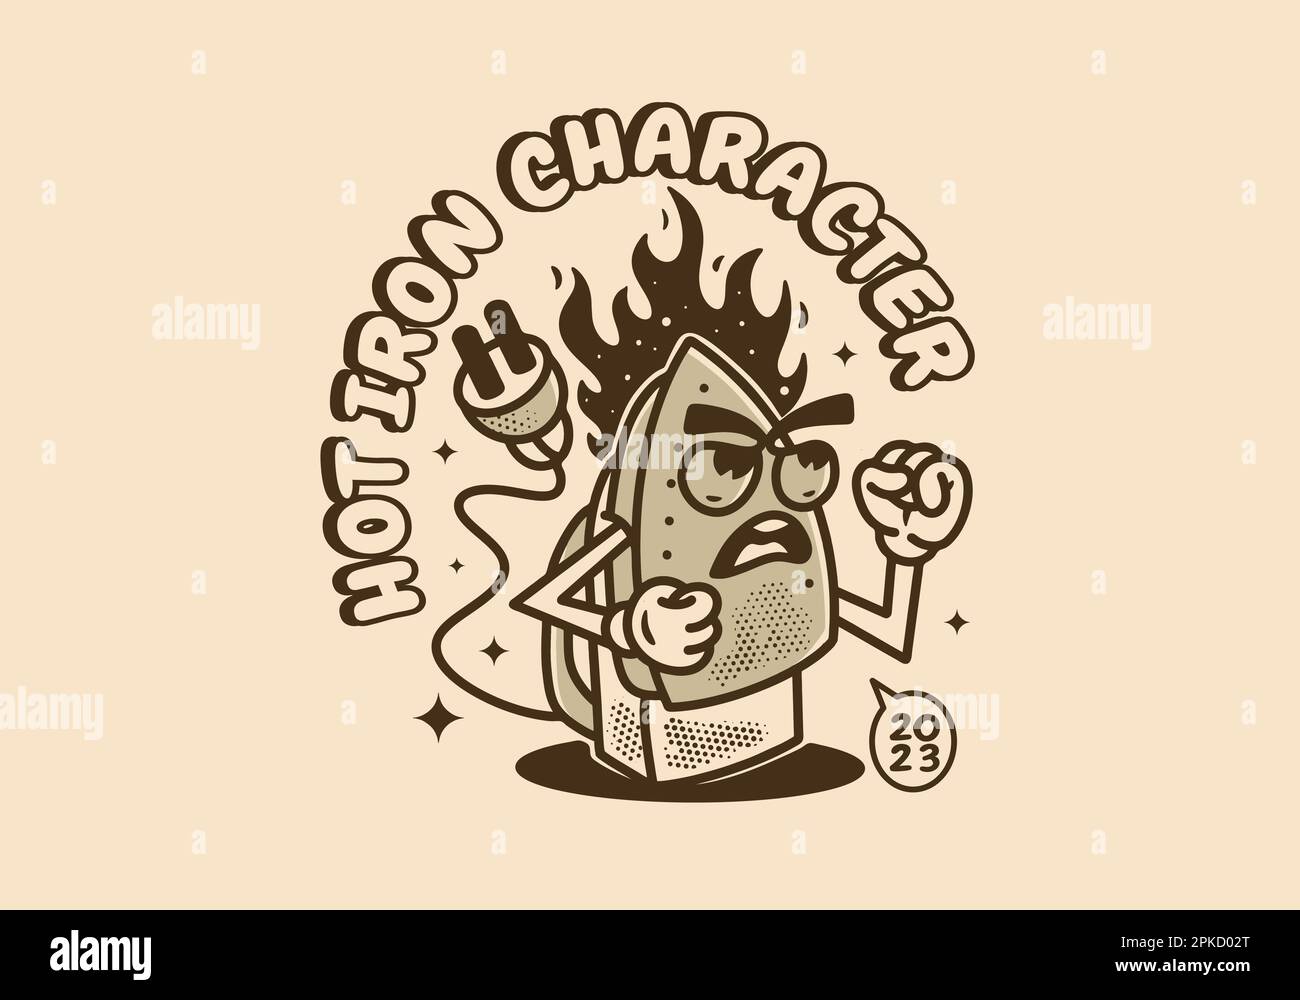 Vintage mascot character illustration design of Electric iron with angry face and flames Stock Vector